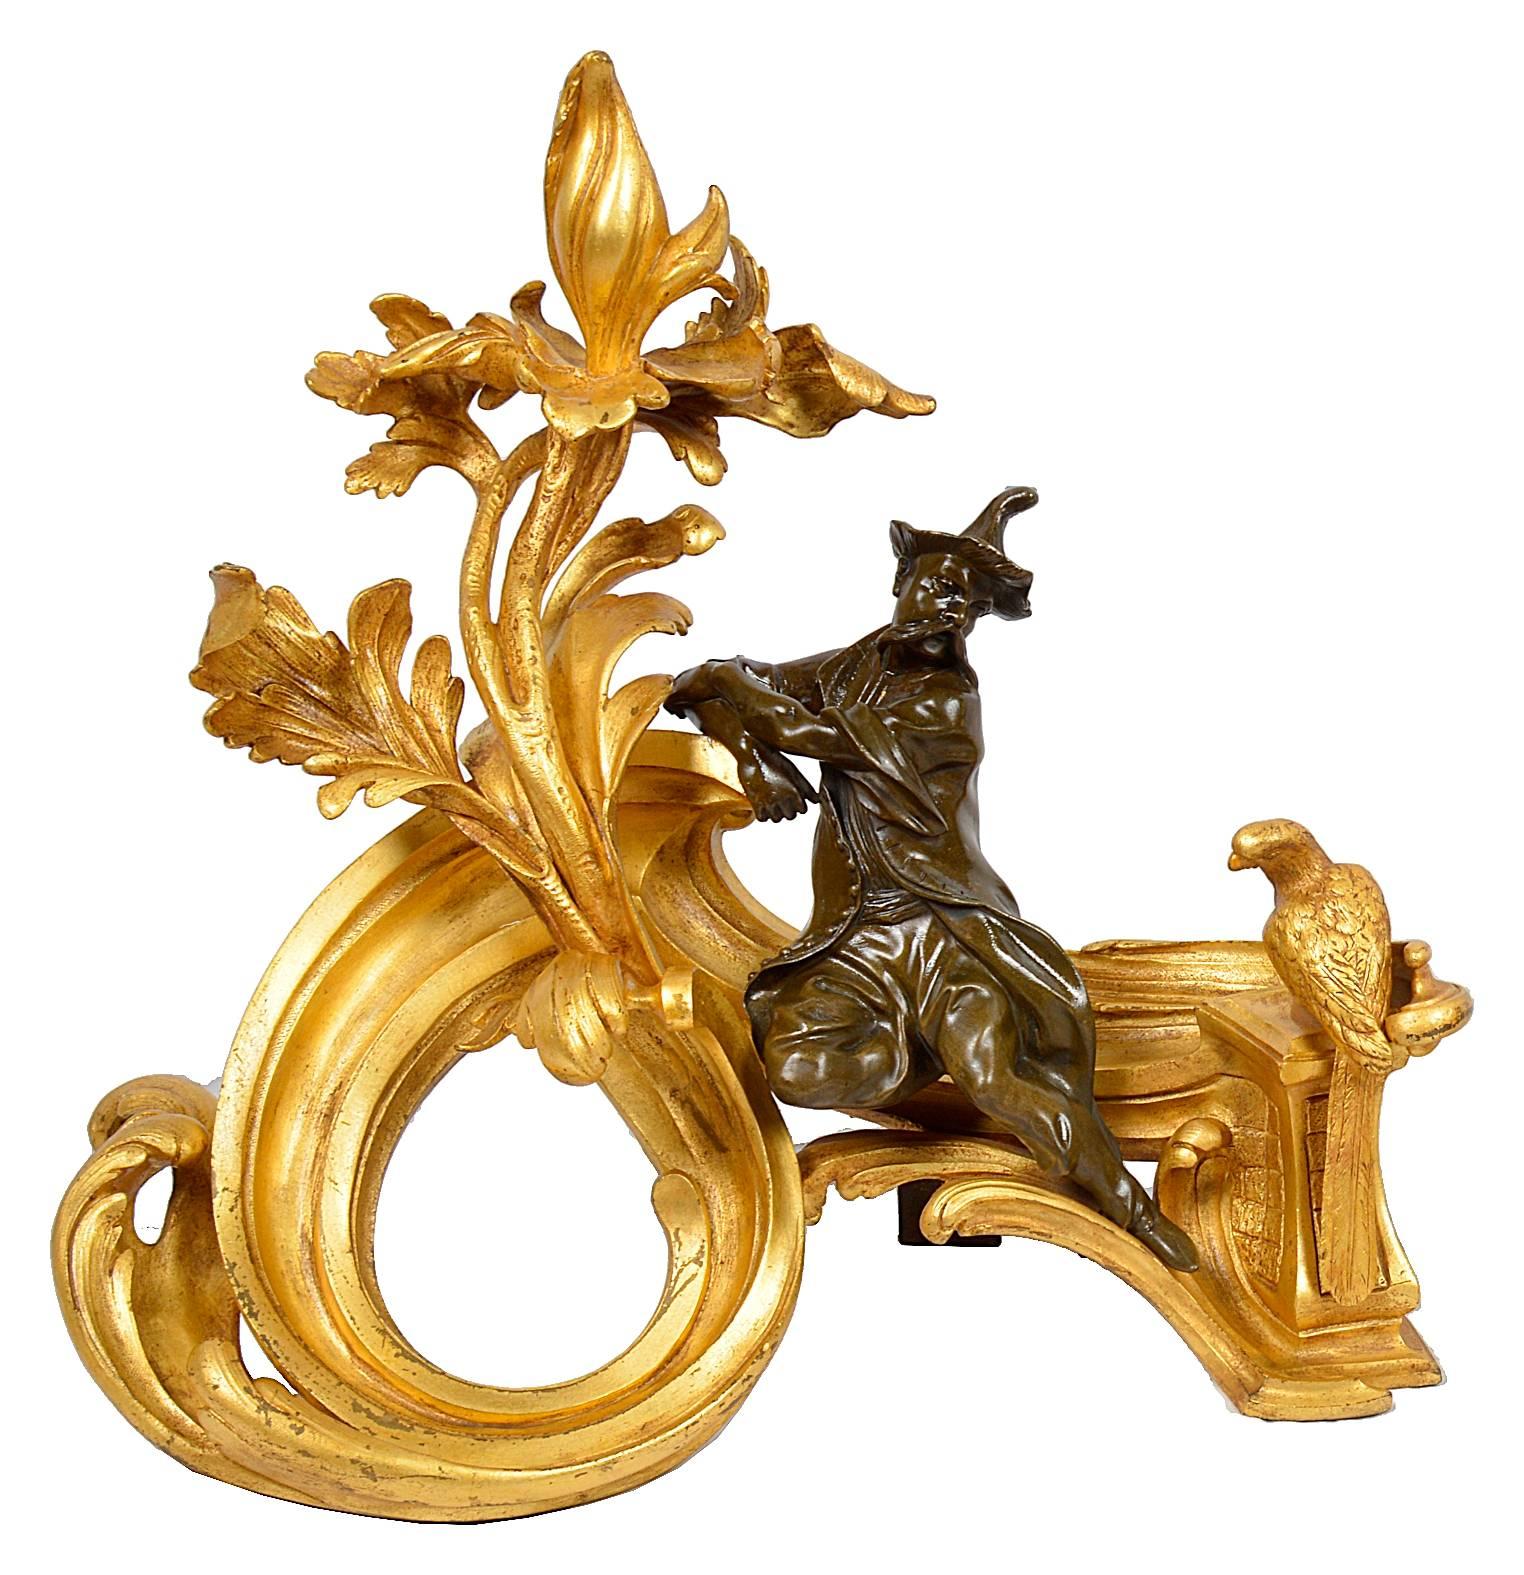 A very decorative and stylish pair of French gilded ormolu and bronze patinated chenets (fire dogs) depicting a China man and women resting on scrolling foliate with doves on either end.